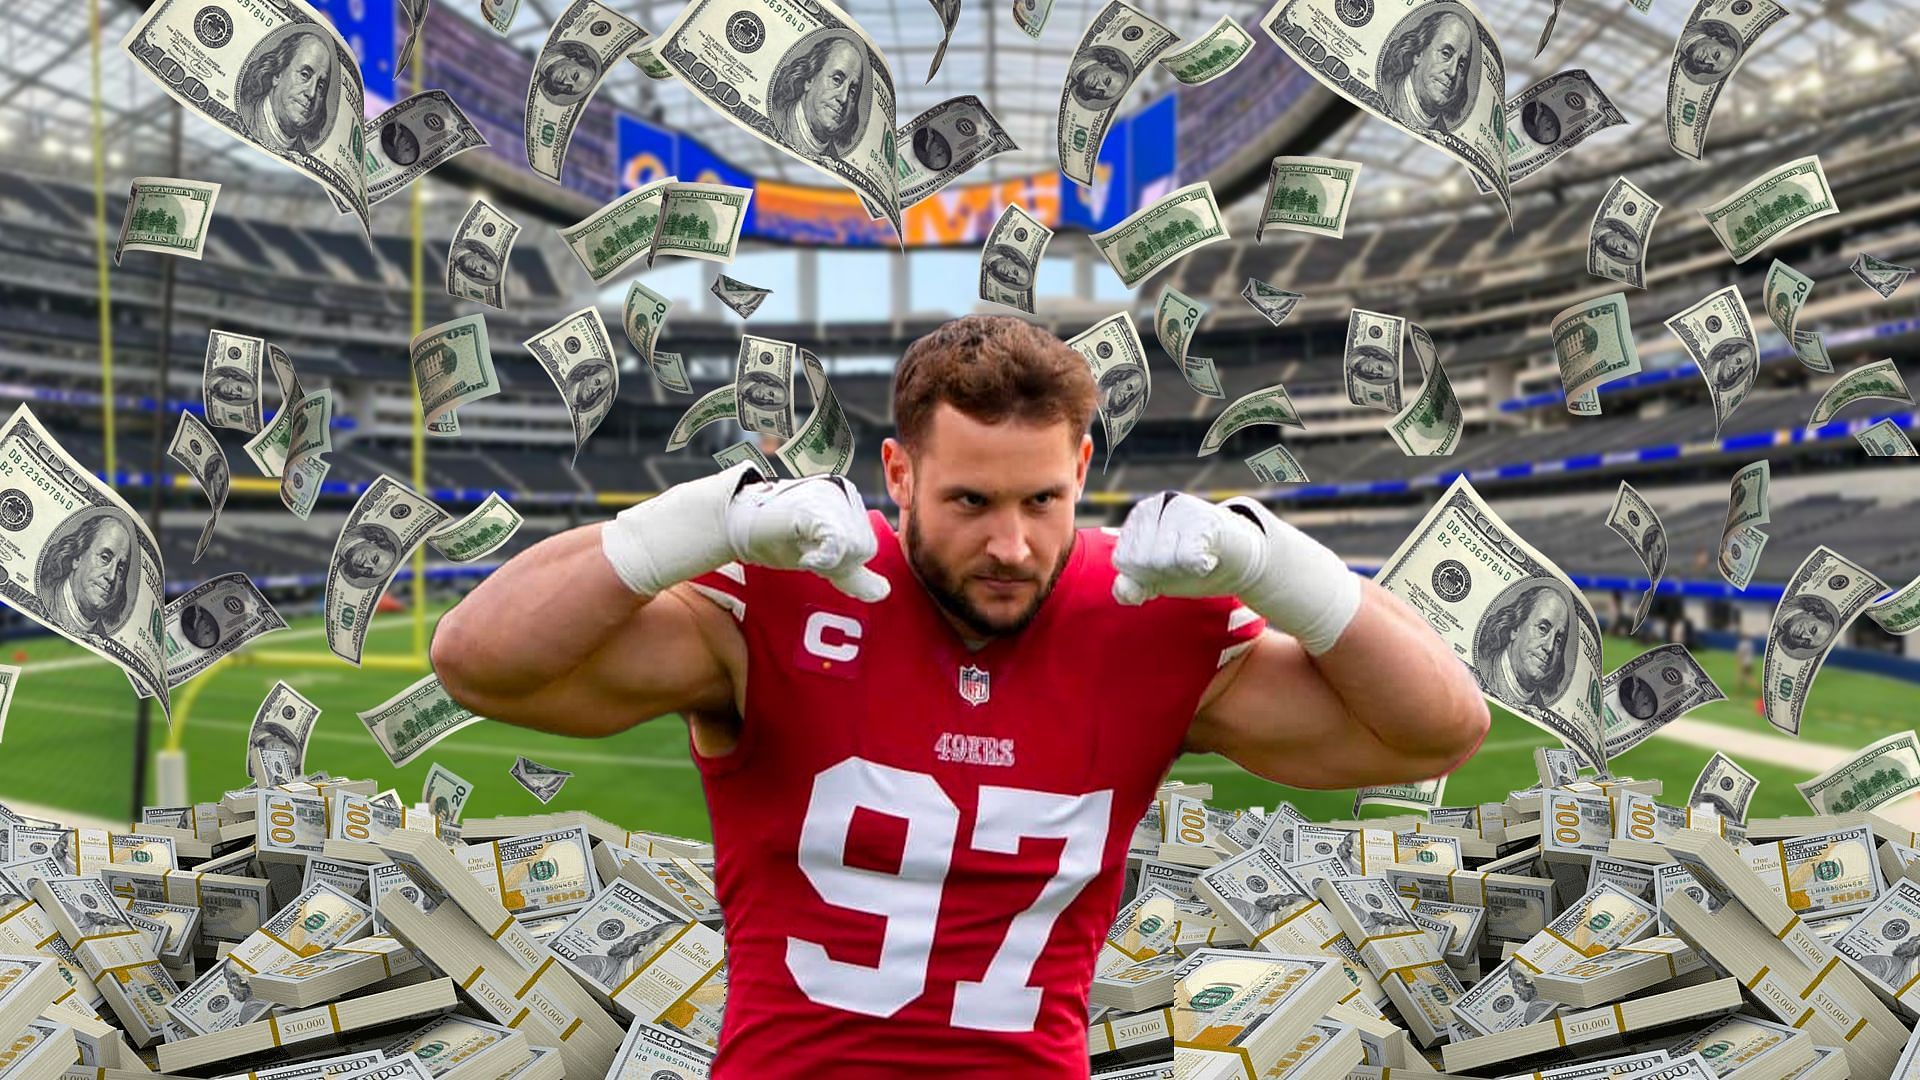 Nick Bosa is set to earn a huge paycheck from the 49ers